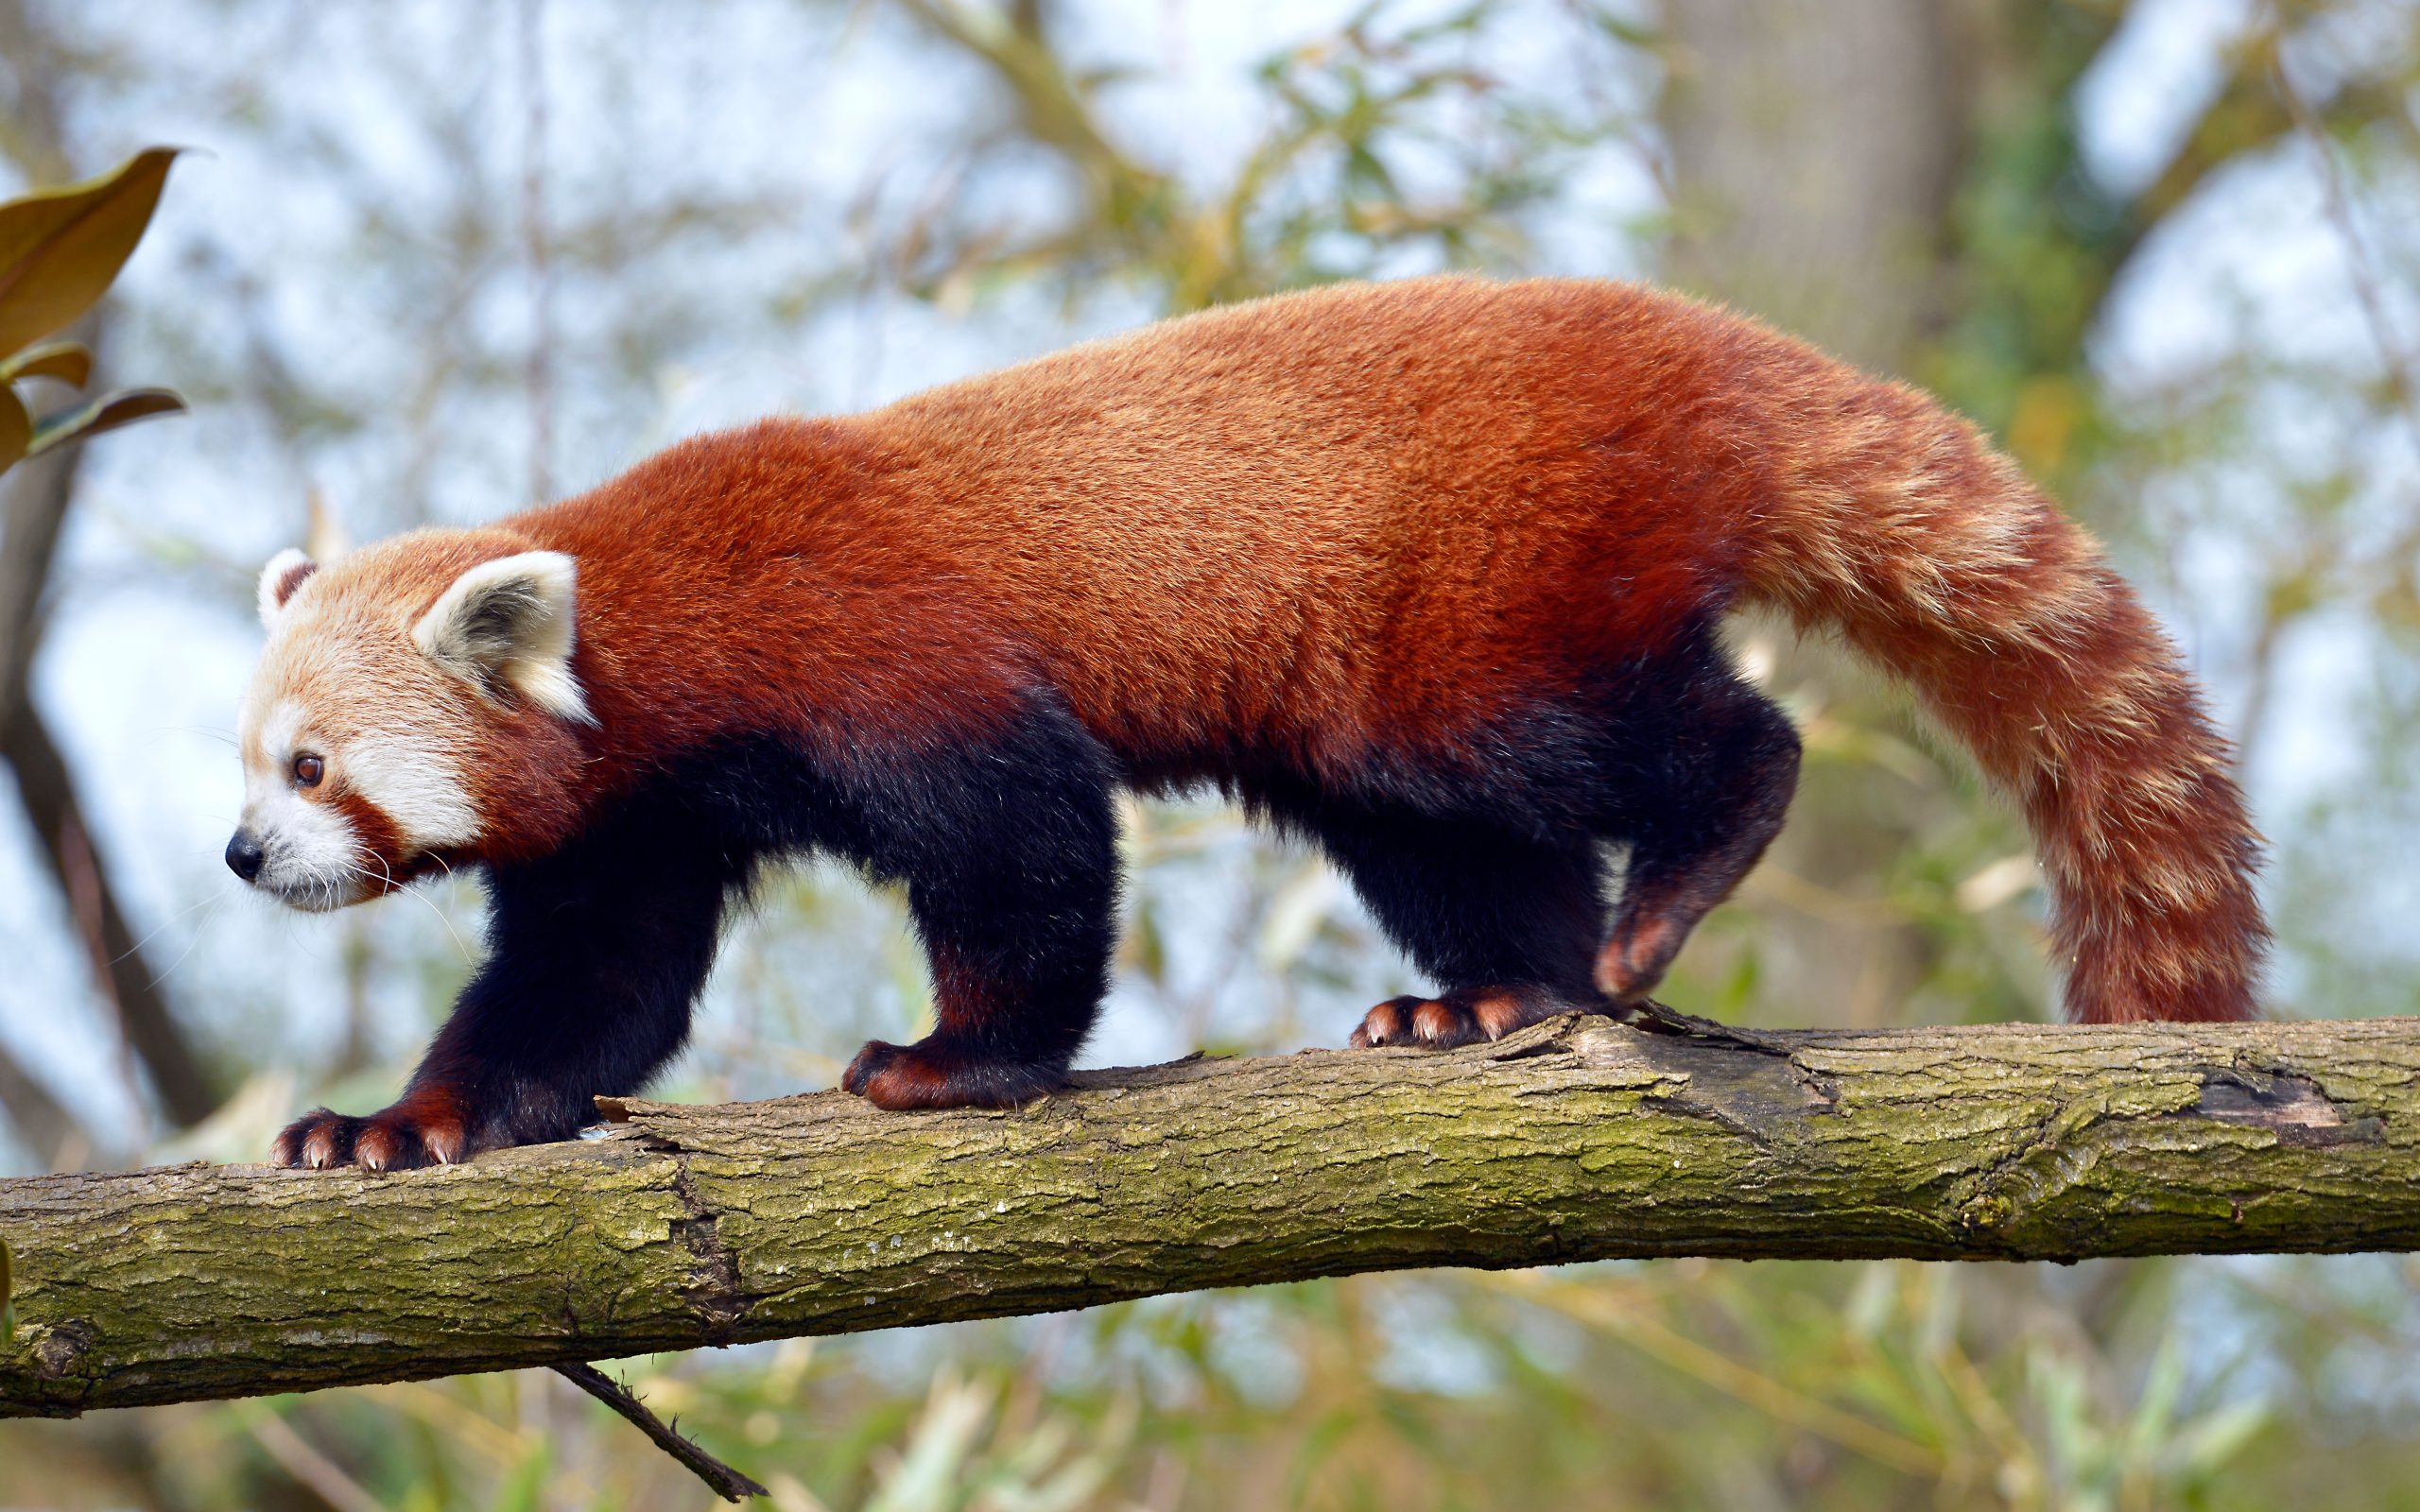 The Enigmatic World of Red Pandas: Top 10 Fascinating Facts